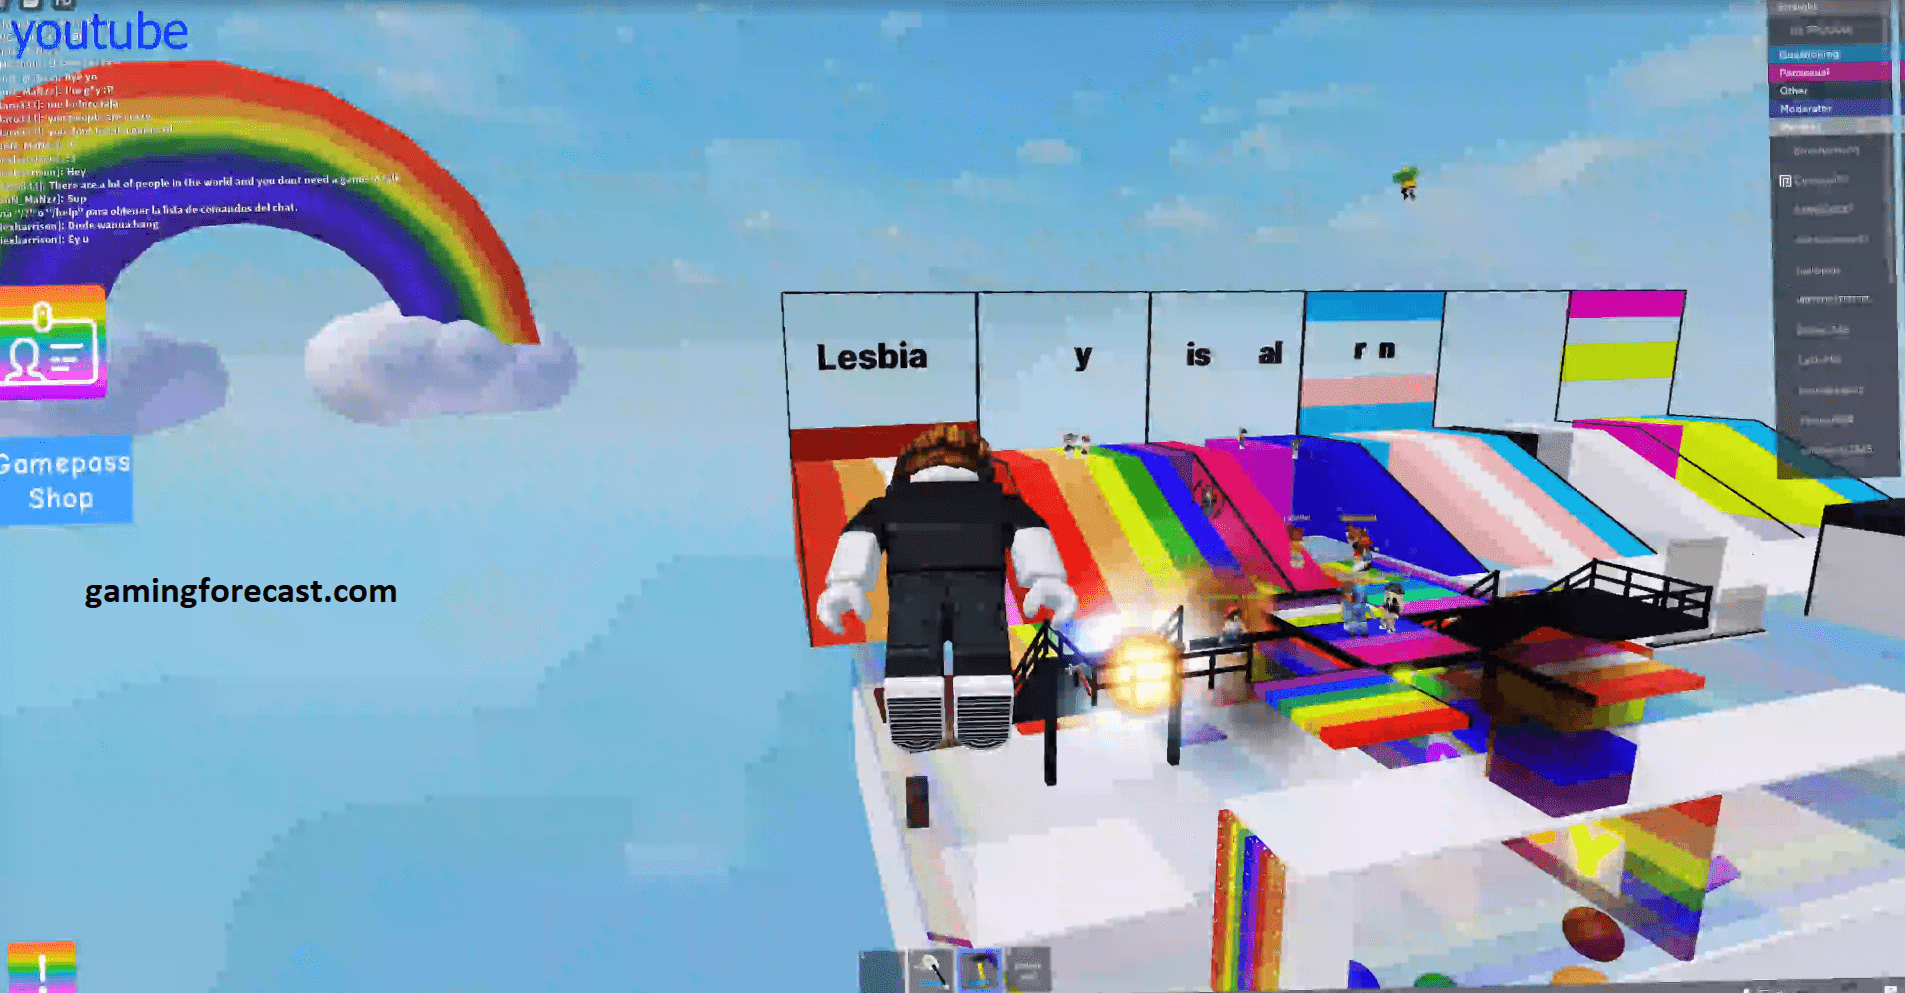 Roblox Hack Download Pc Destroy Lobby Fly Aimbot Scripts 2021 Gaming Forecast Download Free Online Game Hacks - roblox do you dont you